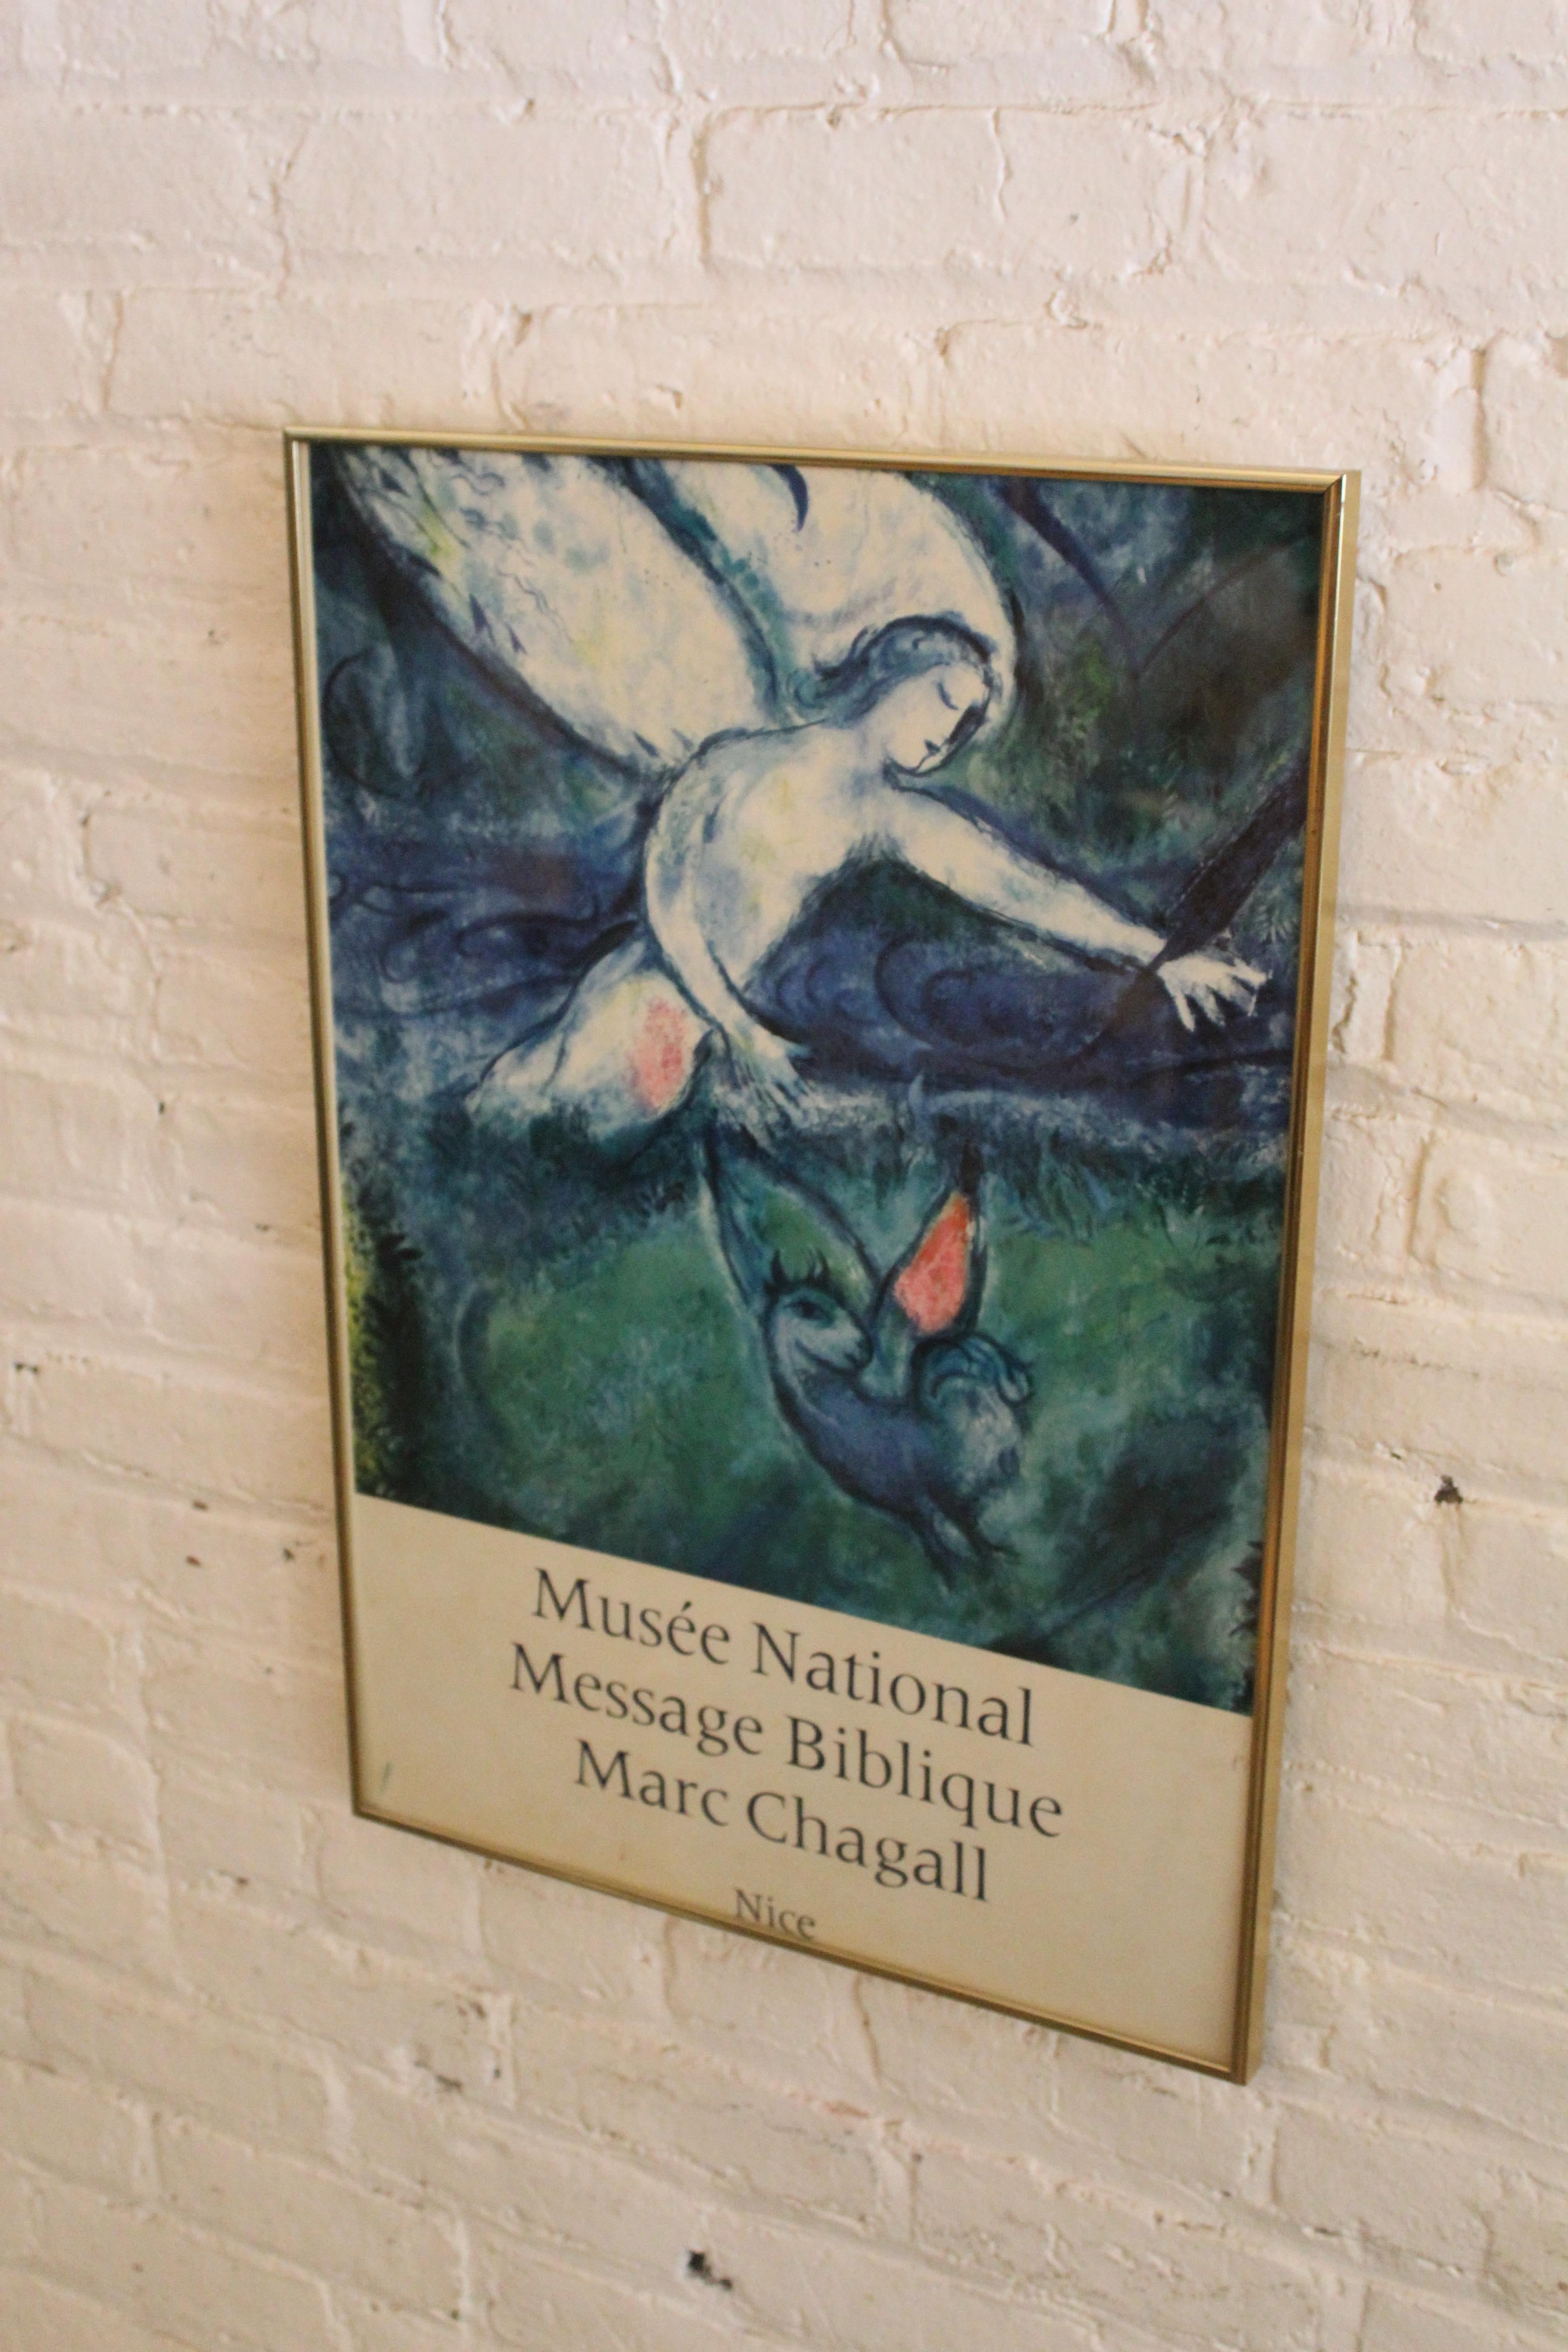 Give any room an angelic French flair with this framed vintage lithograph from the Musée National Marc Chagall in Nice, France. Featuring a closeup scene from his iconic 1961 Christian-surrealist work 